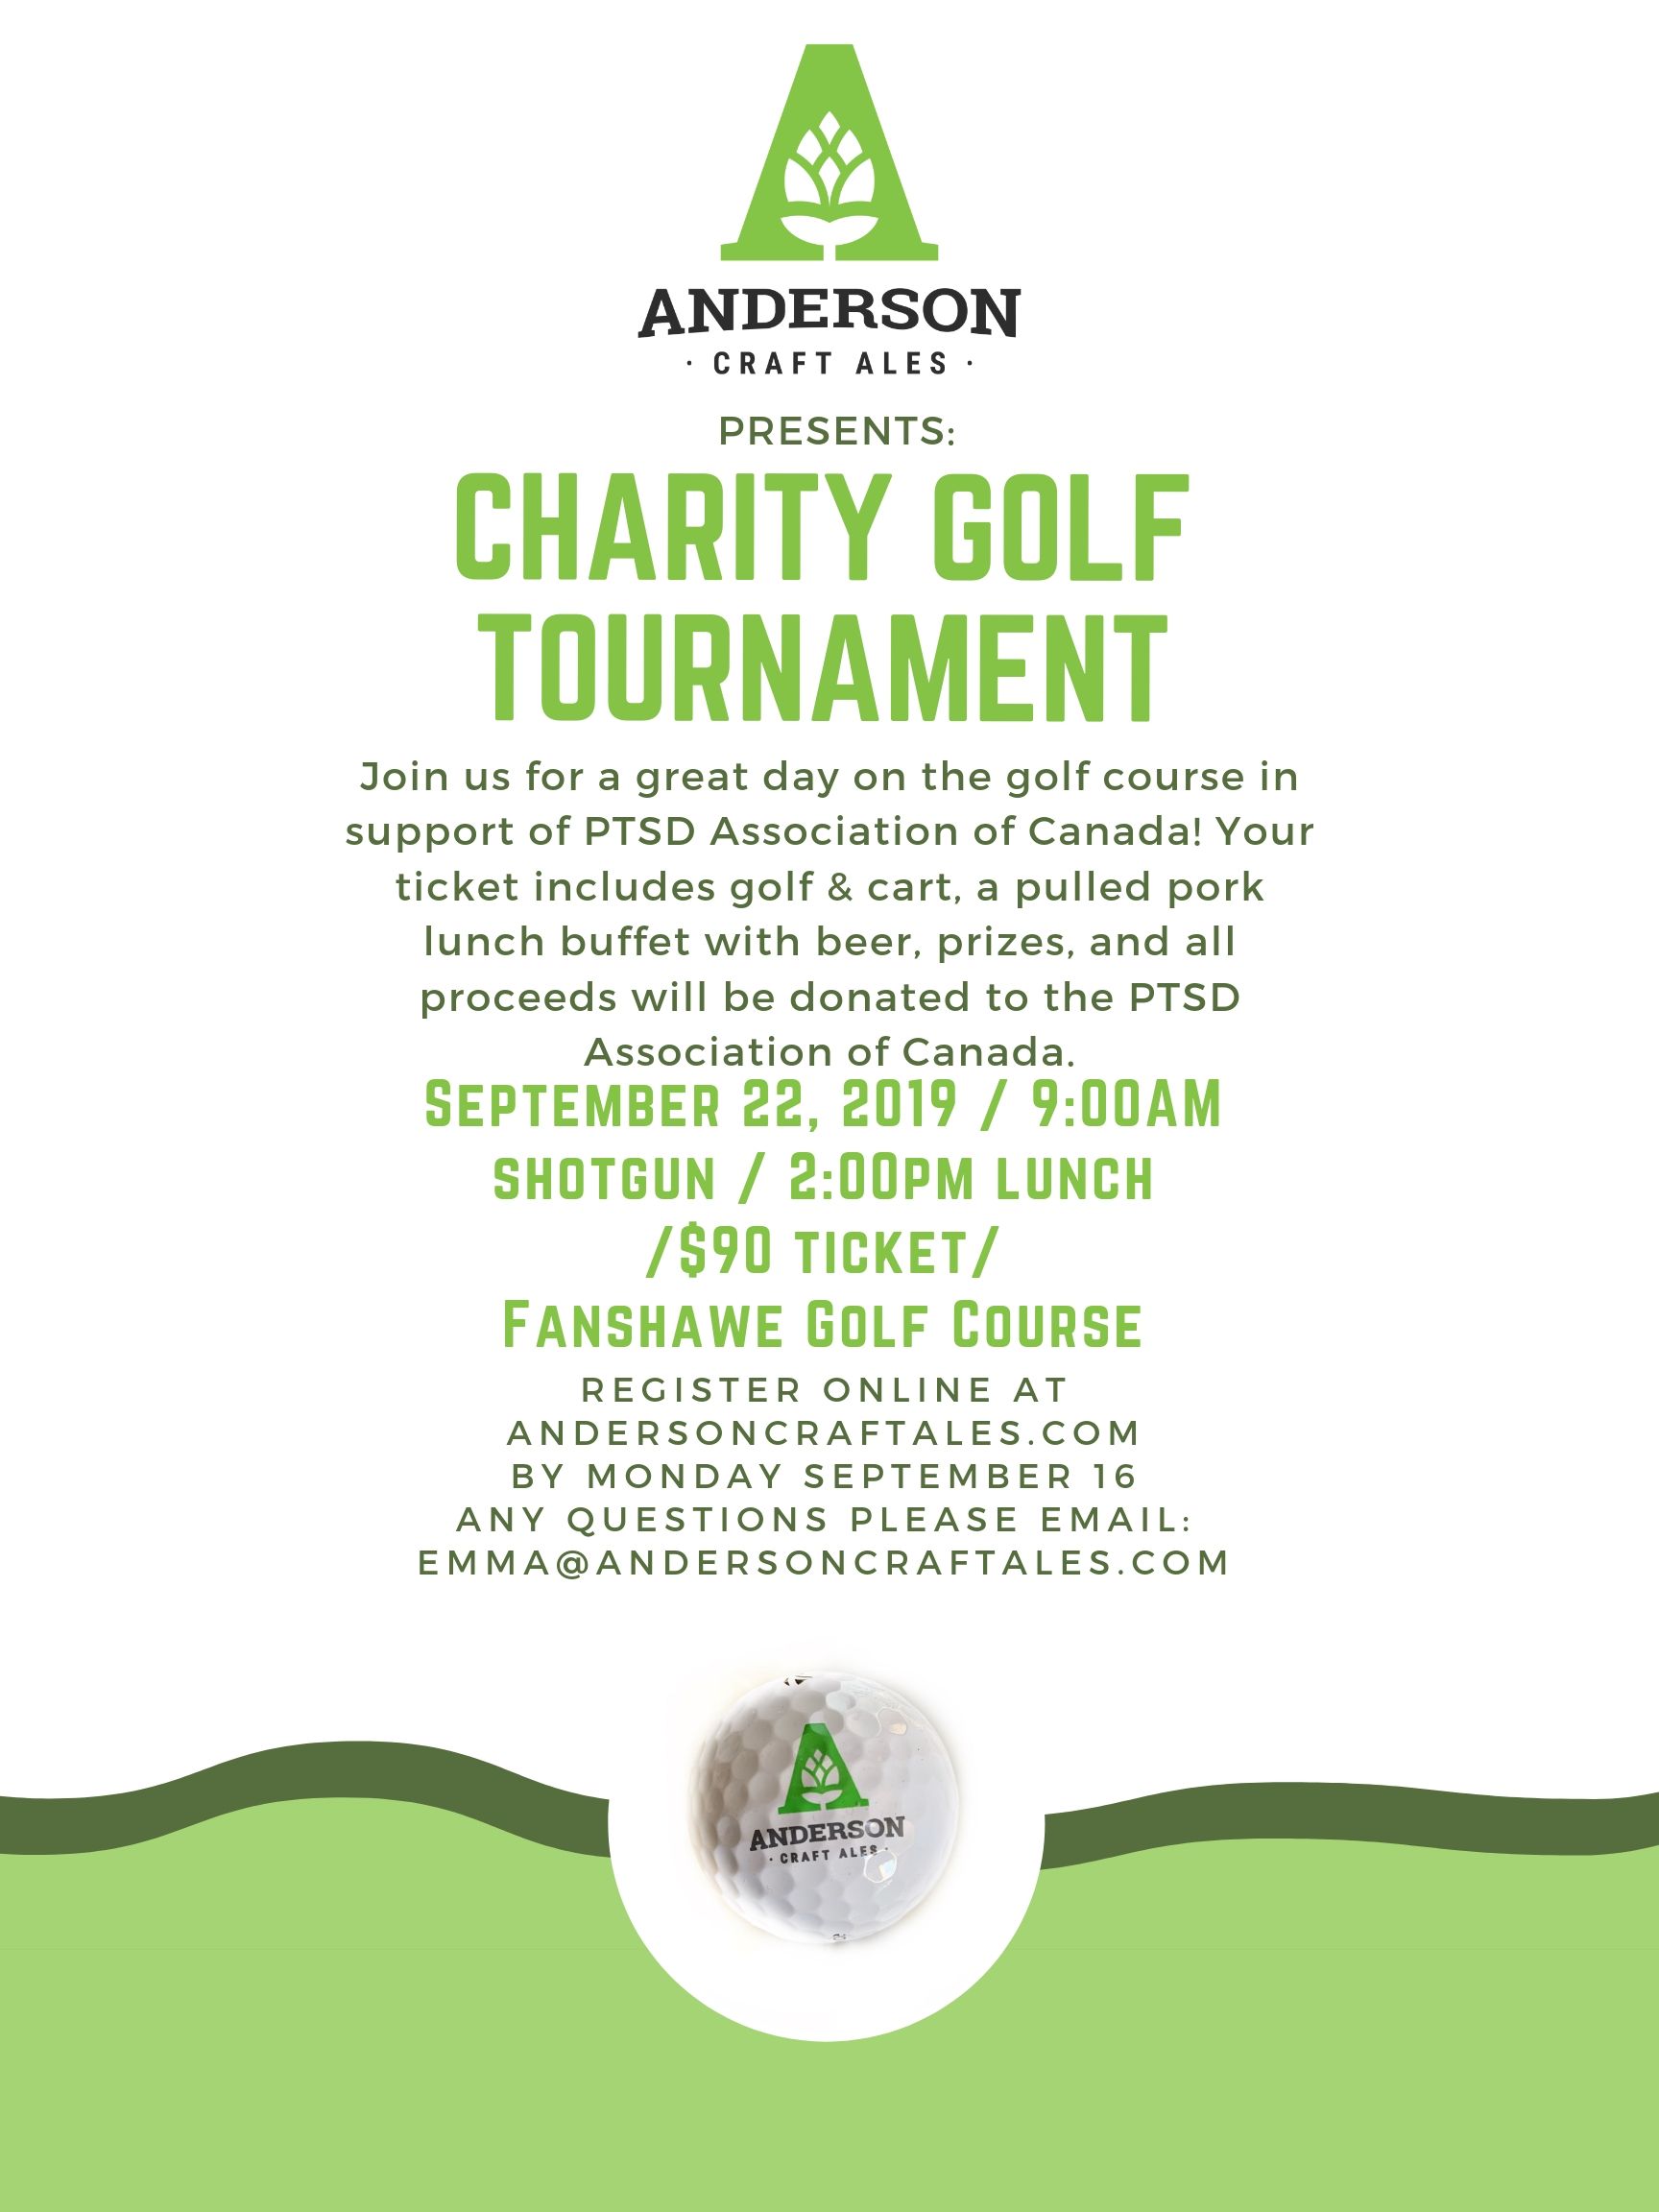 Anderson Craft Ales Charity Golf Tournament